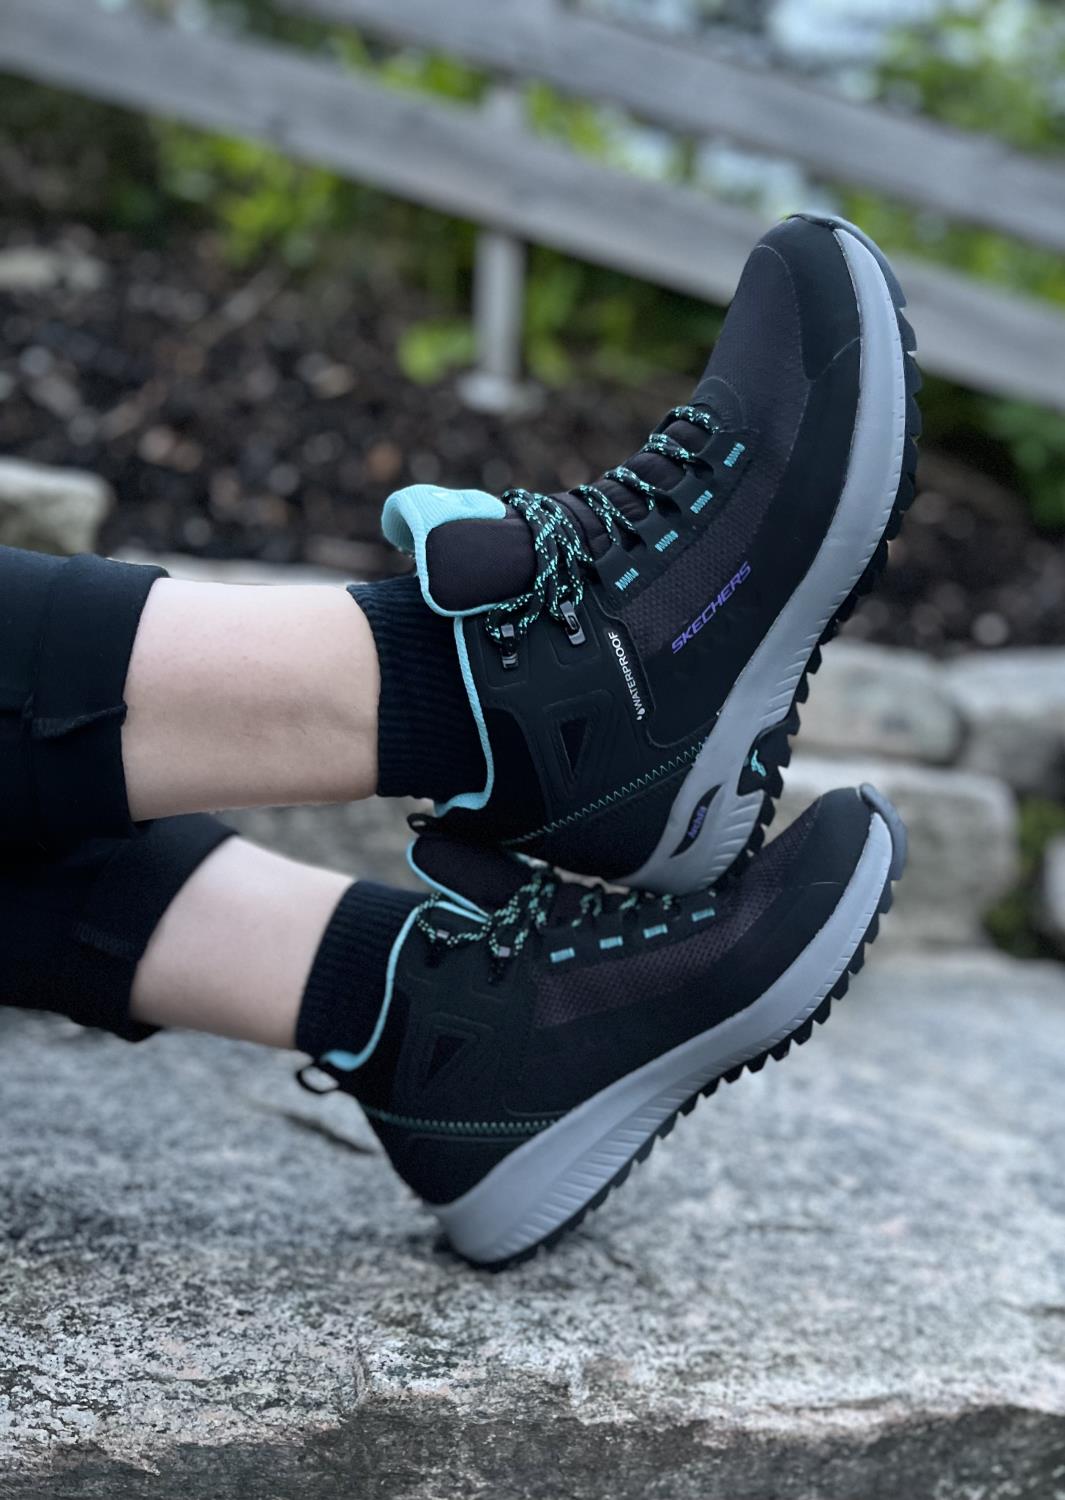 Skechers Arch Fit Discover - Elevation Gain Waterproof